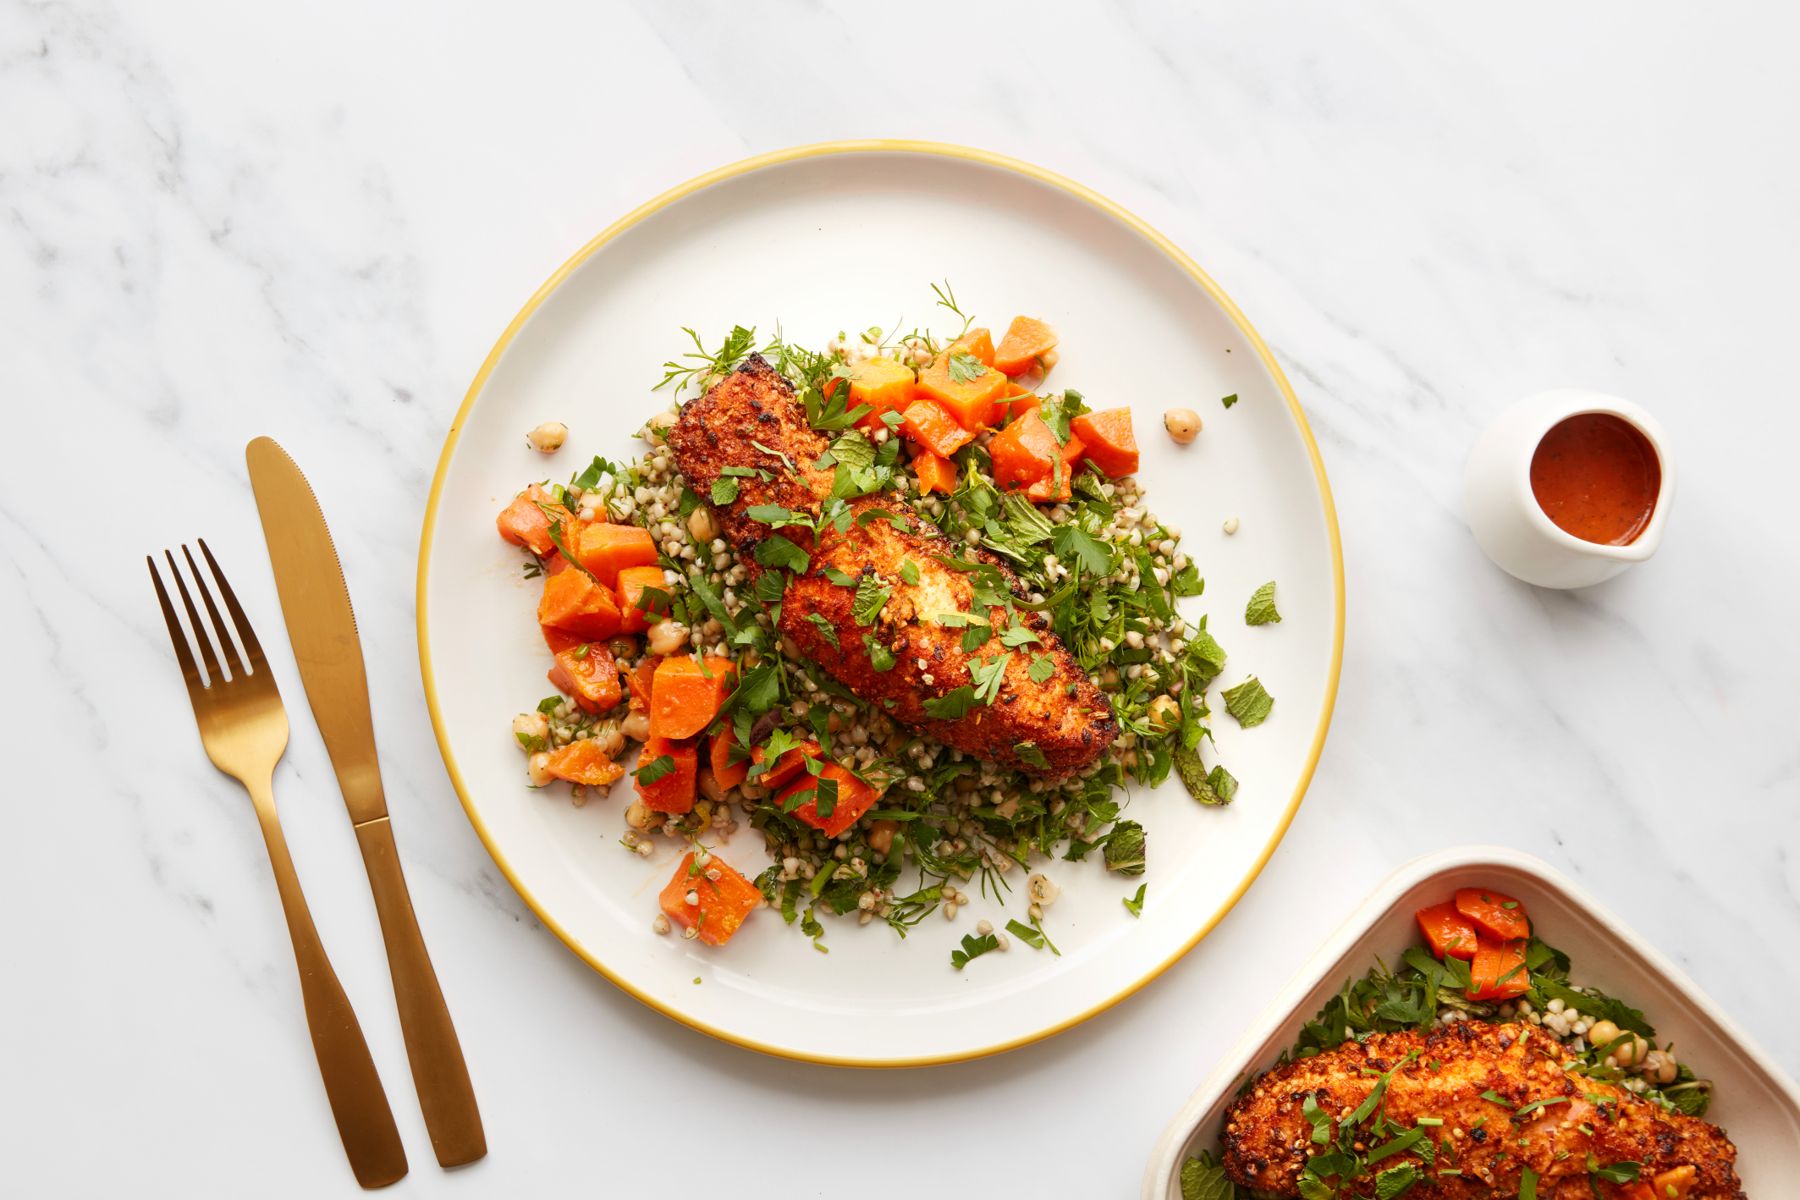 Lions prep - Hazelnut Dukkah Crusted Salmon with Moroccan Sauce, Herby Buckwheat, Chickpea & Carrot Tabbouleh